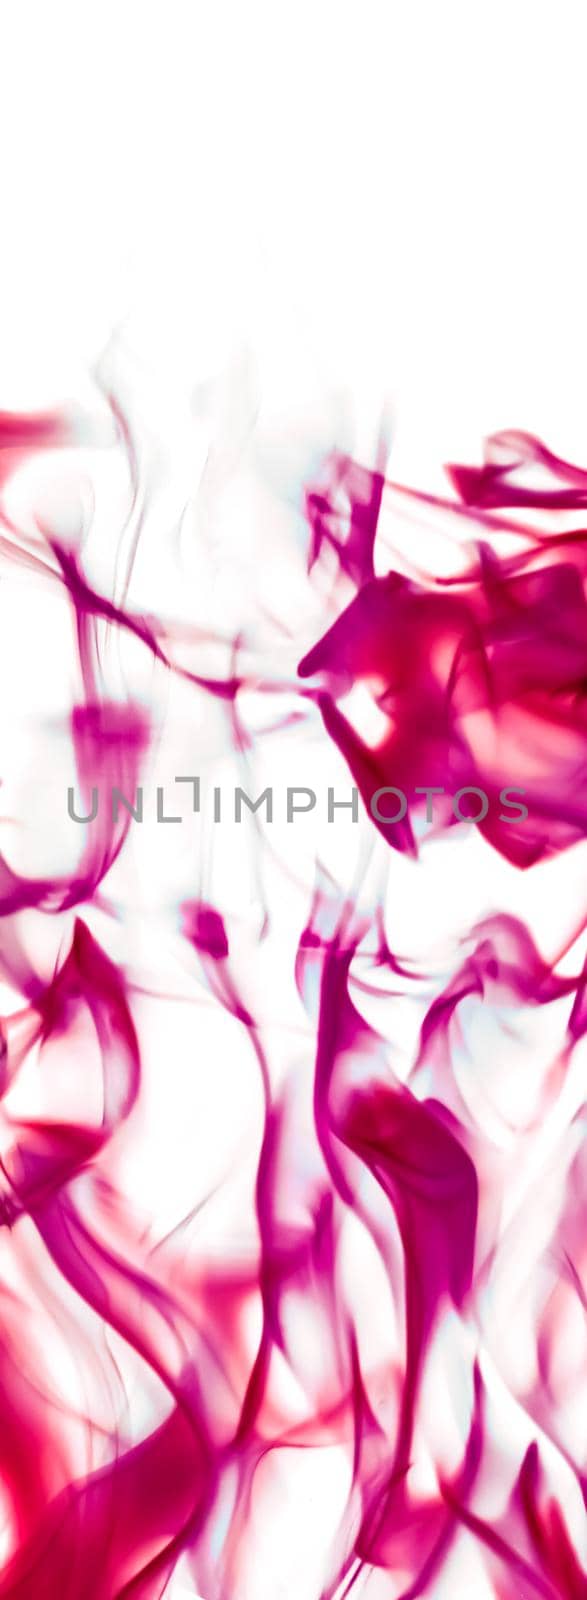 Technology, science and artistic flow concept - Abstract wave background, red element for design